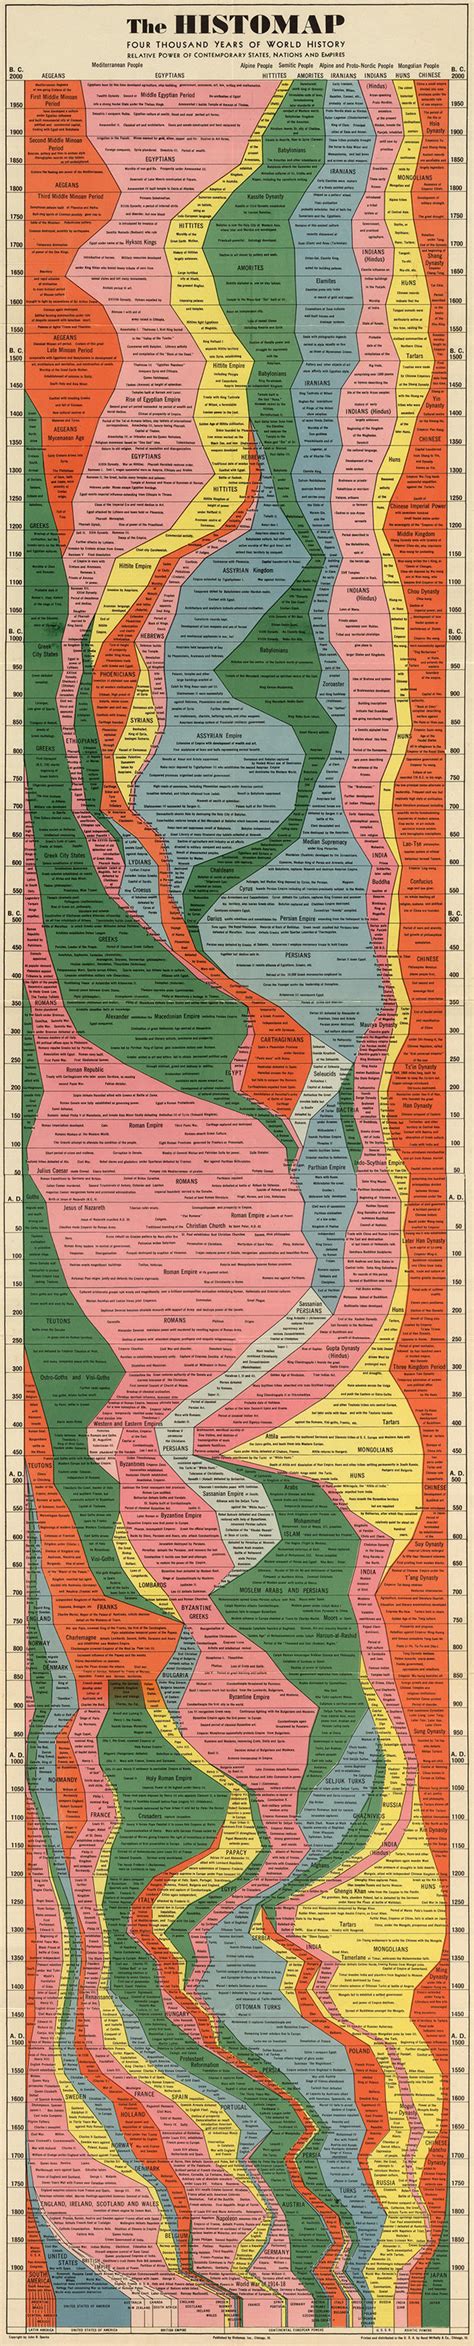 Years Of Human History Captured In One Retro Chart Infographic